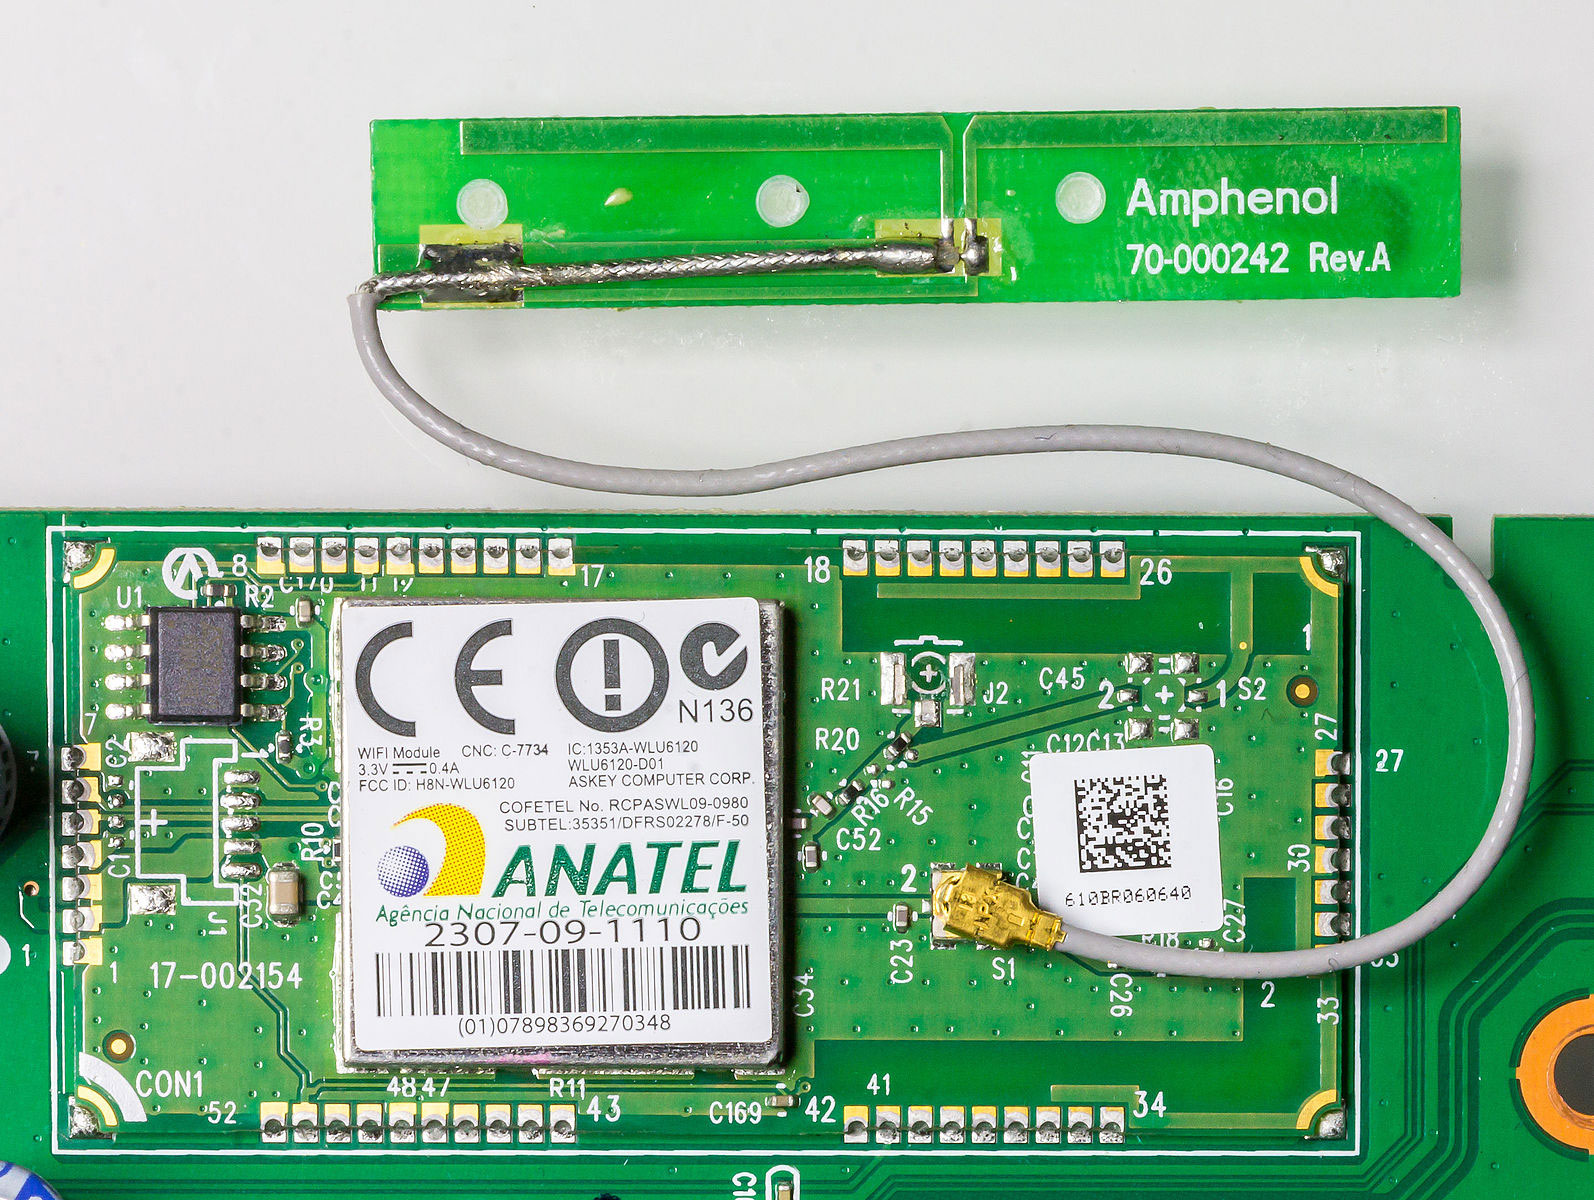 A Wi-Fi card with a wire antenna